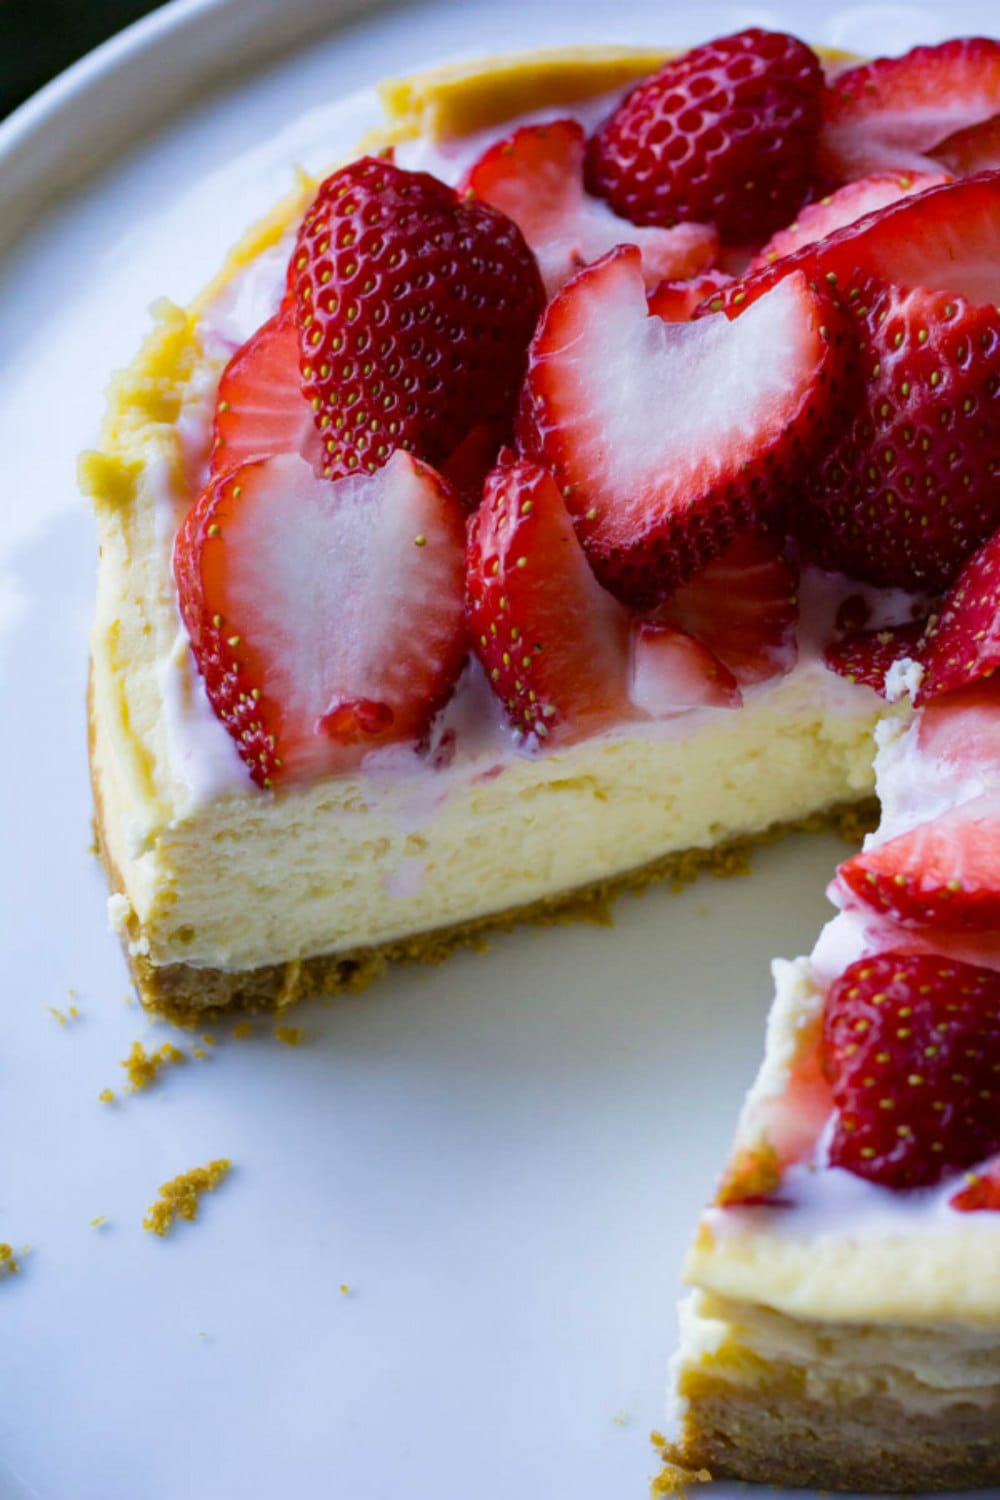 How to Make Perfect Pressure Cooker / Instant Pot Cheesecake